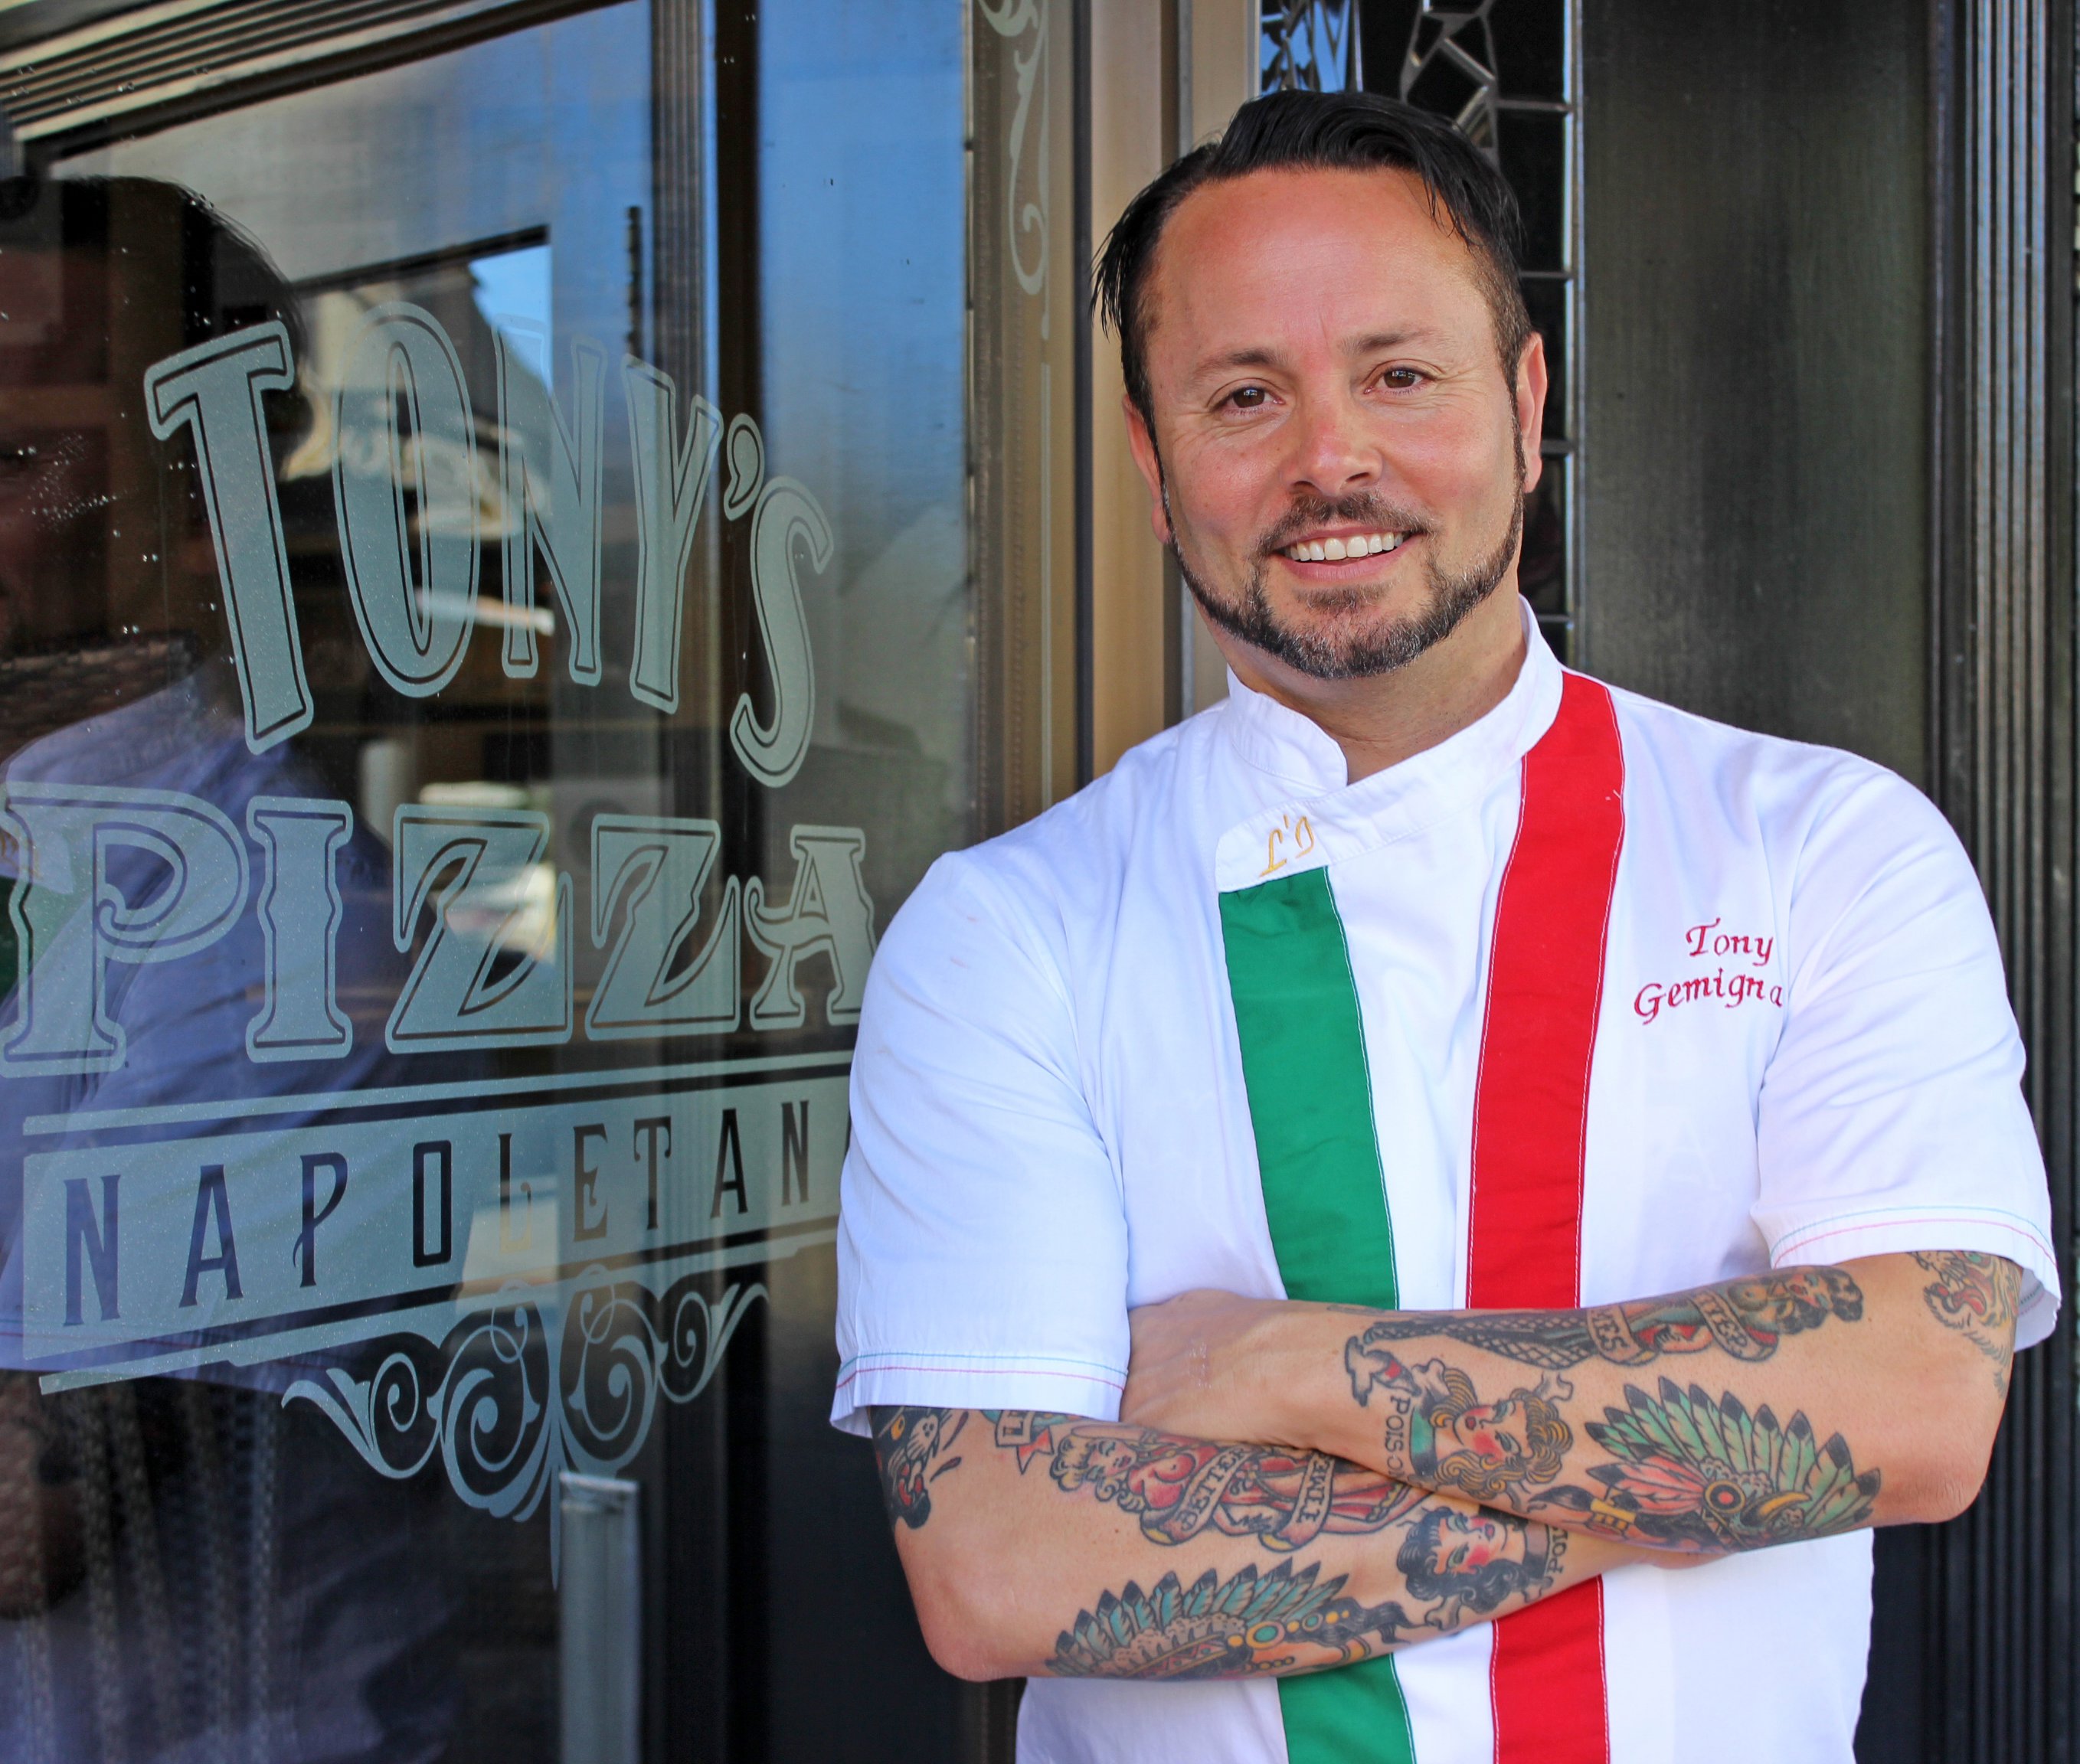 Tony Gemignani posing in front of restaurant. Taken bySarahinloes, CC BY-SA 4.0, via Wikimedia Commons